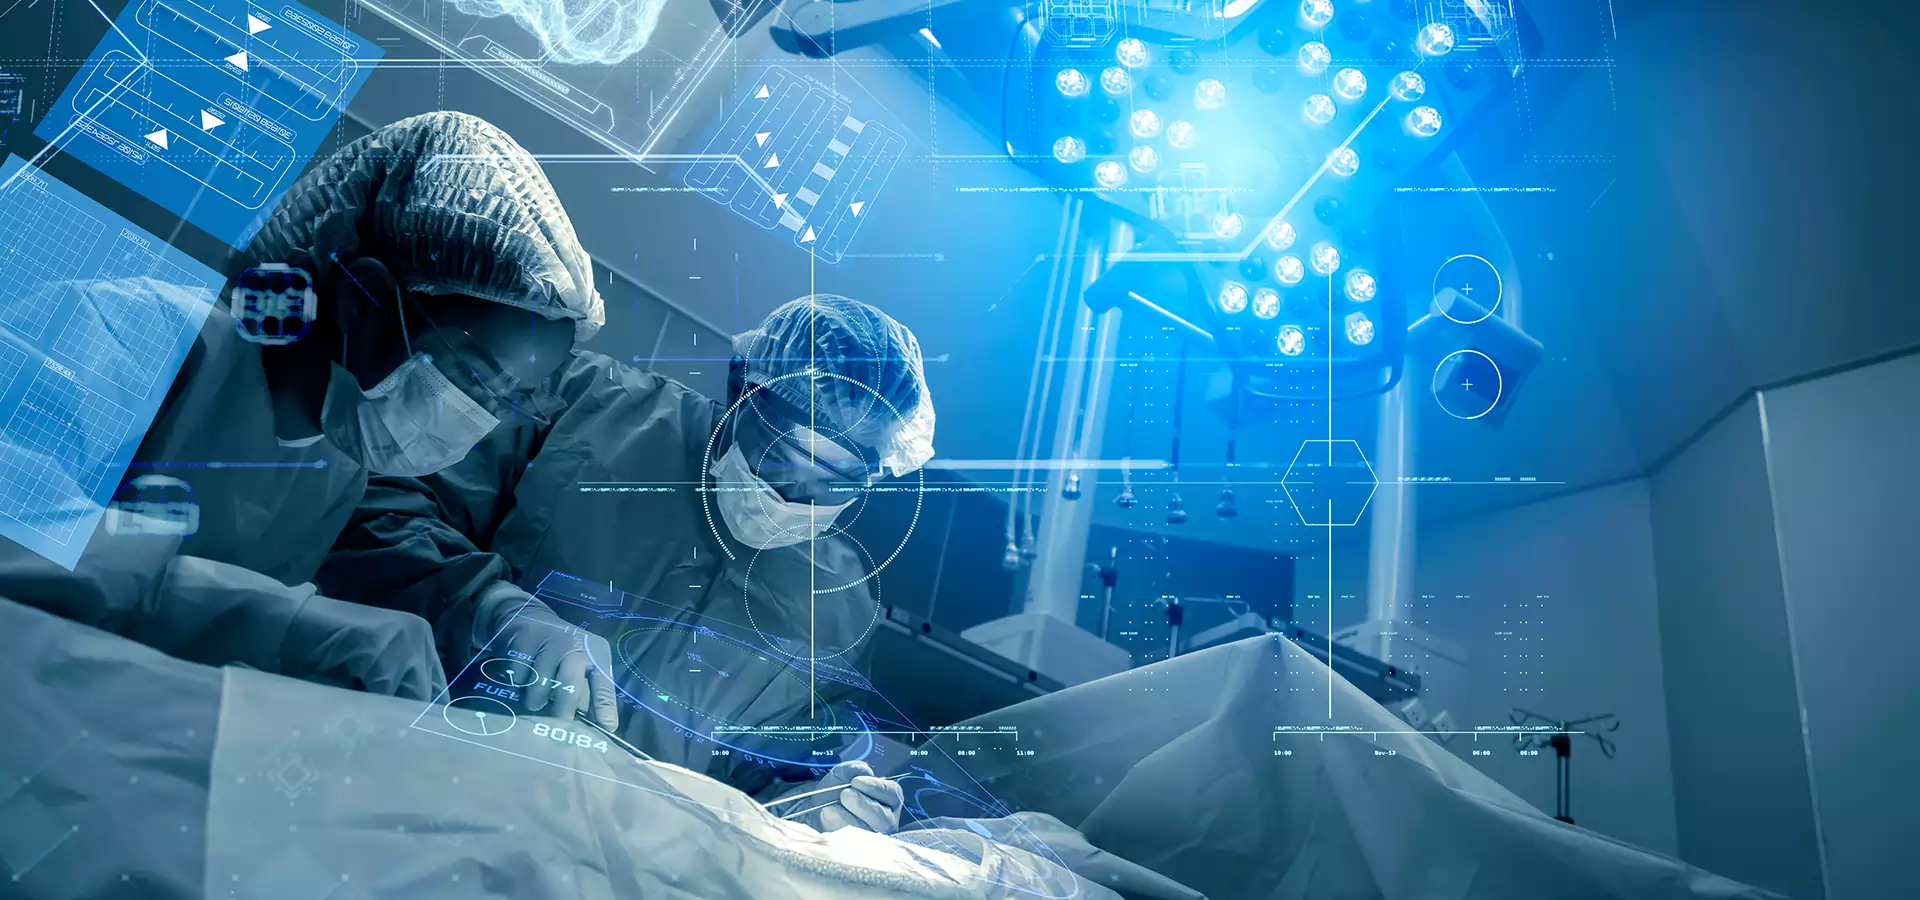 The Evolution of Surgical Innovation